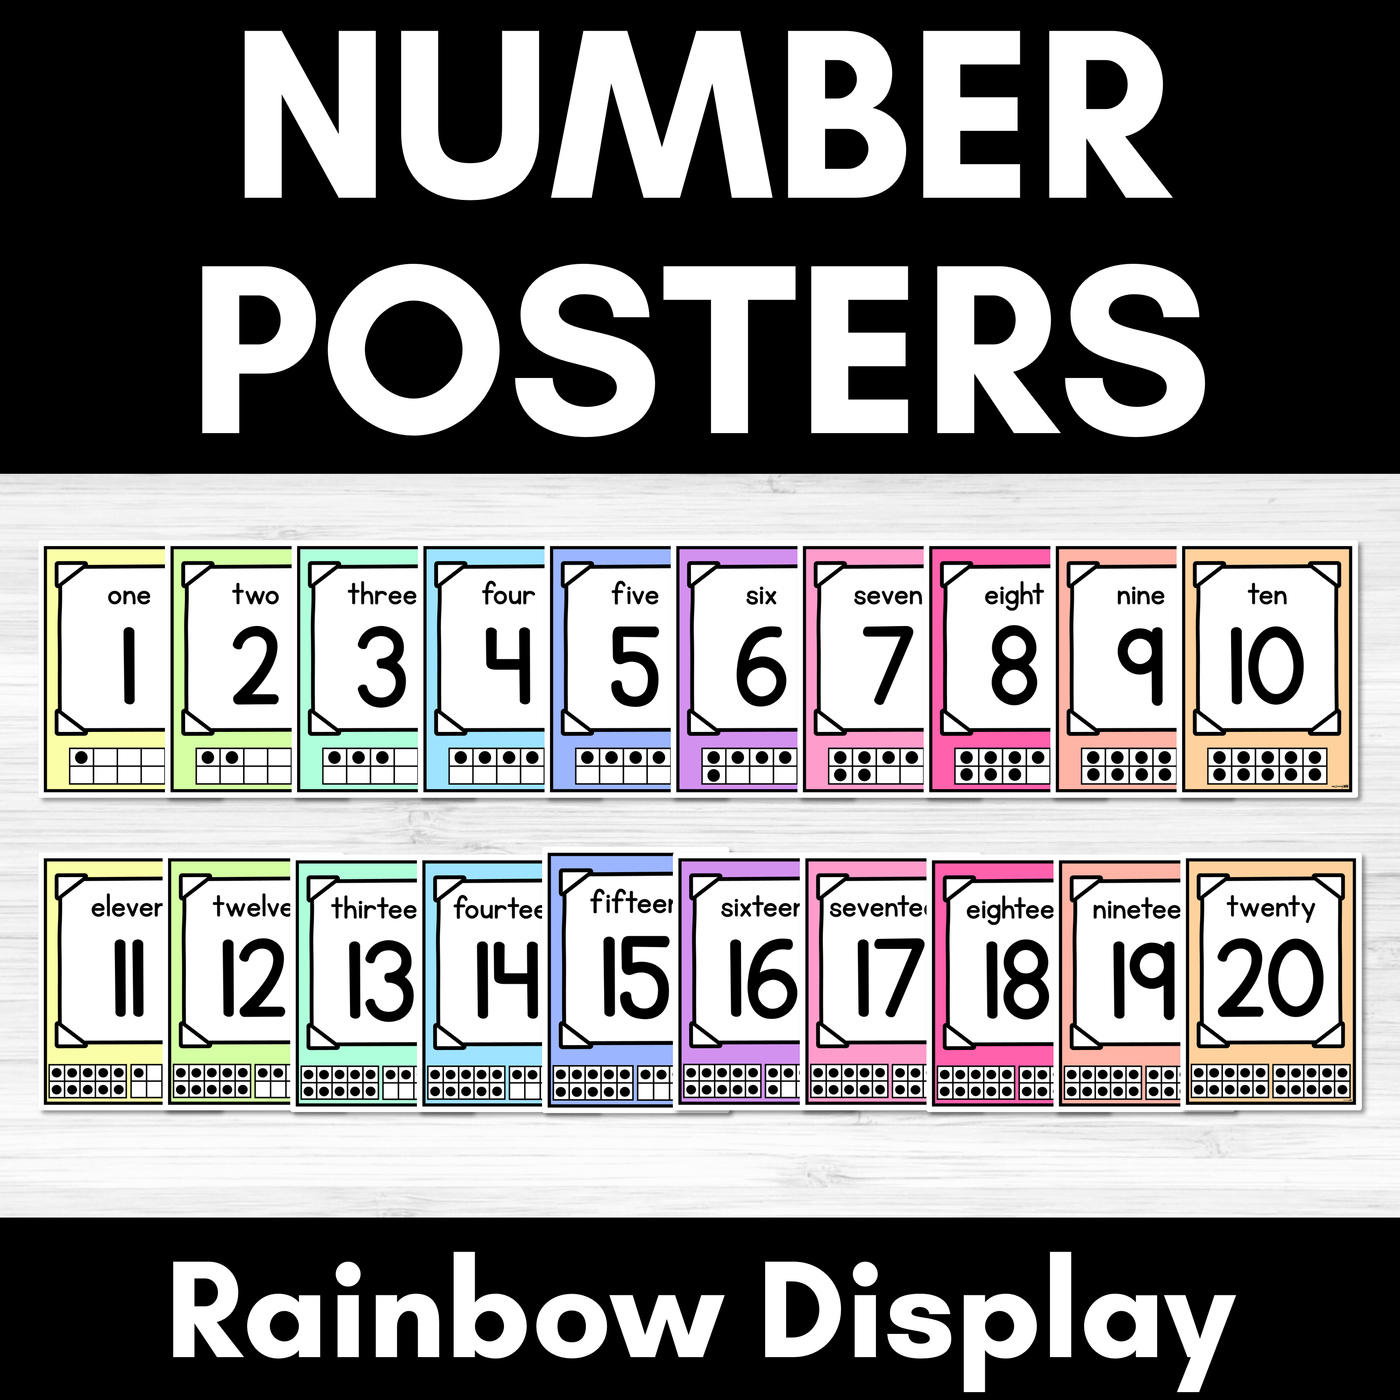 Number Posters RAINBOW